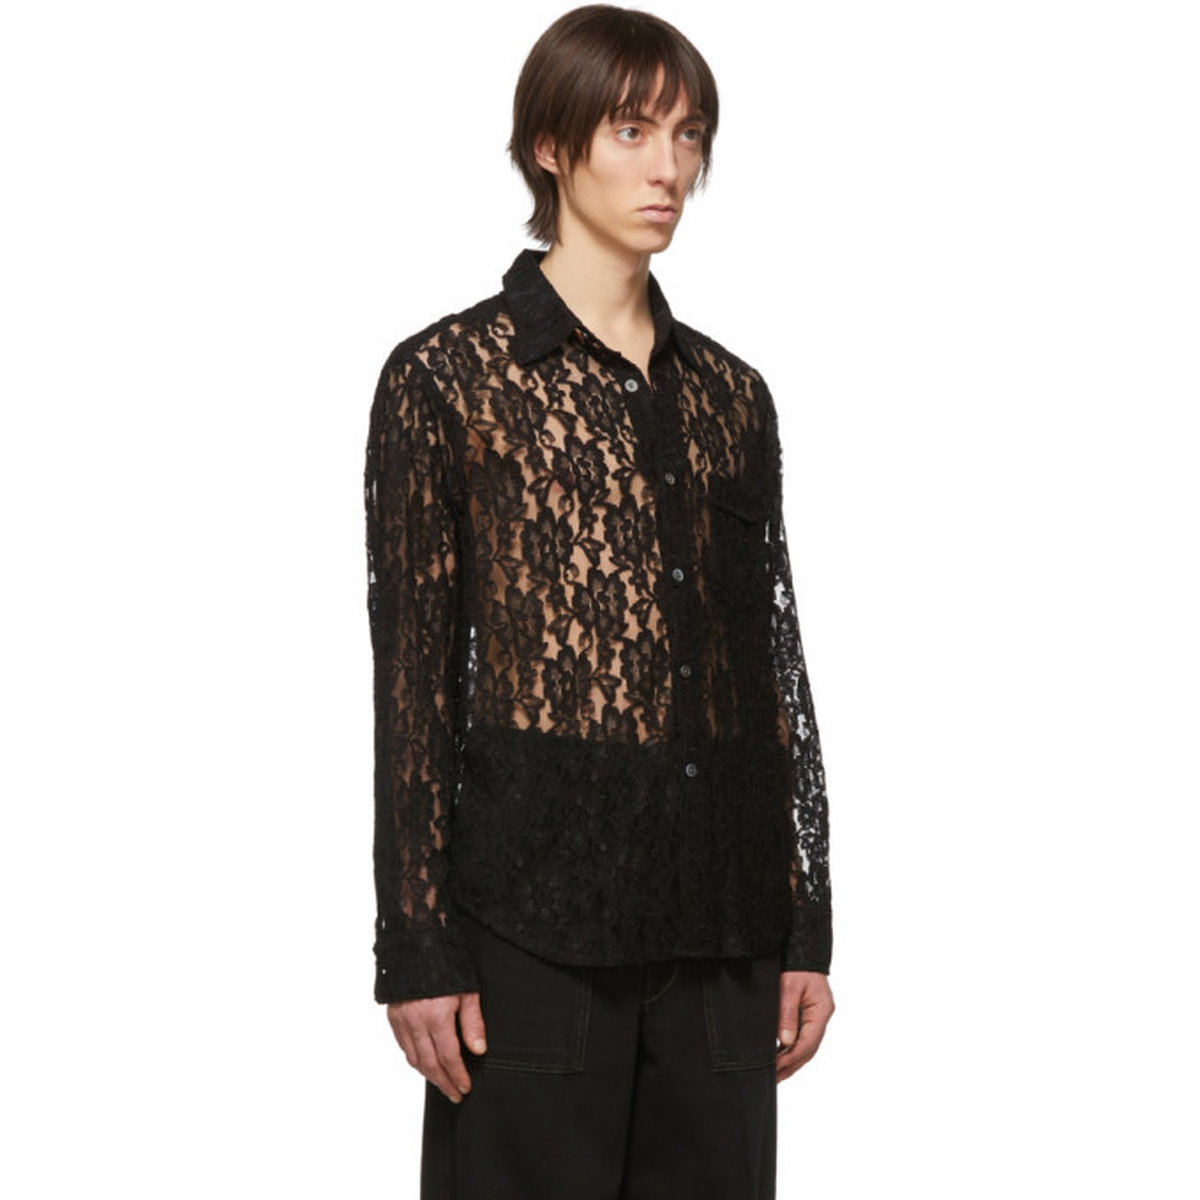 Our Legacy Black Lace Policy Shirt